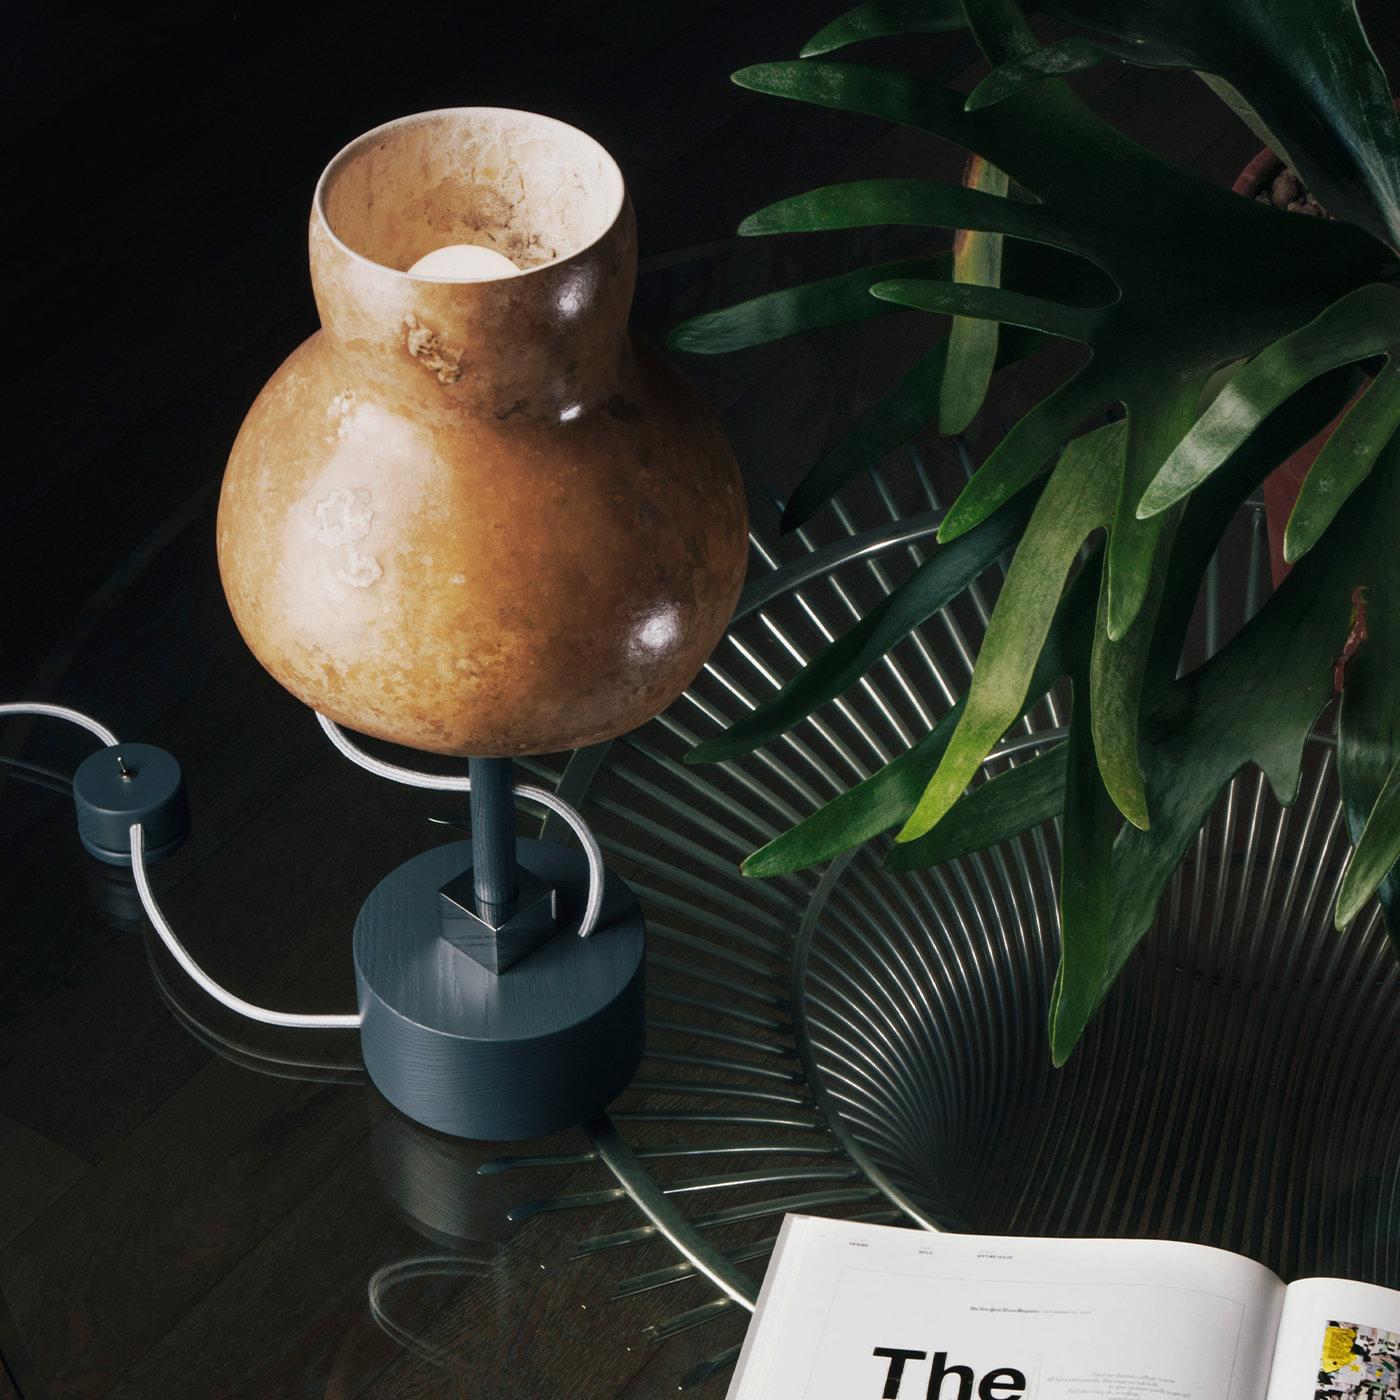 The desk lamp refers to the animal and plant world. The lampshade in Lagenaria dried gourd, with its unique veining, together with the rounded ash wood base, brings to mind a typical inhabitant of the undergrowth. The coloured fabric cable, which